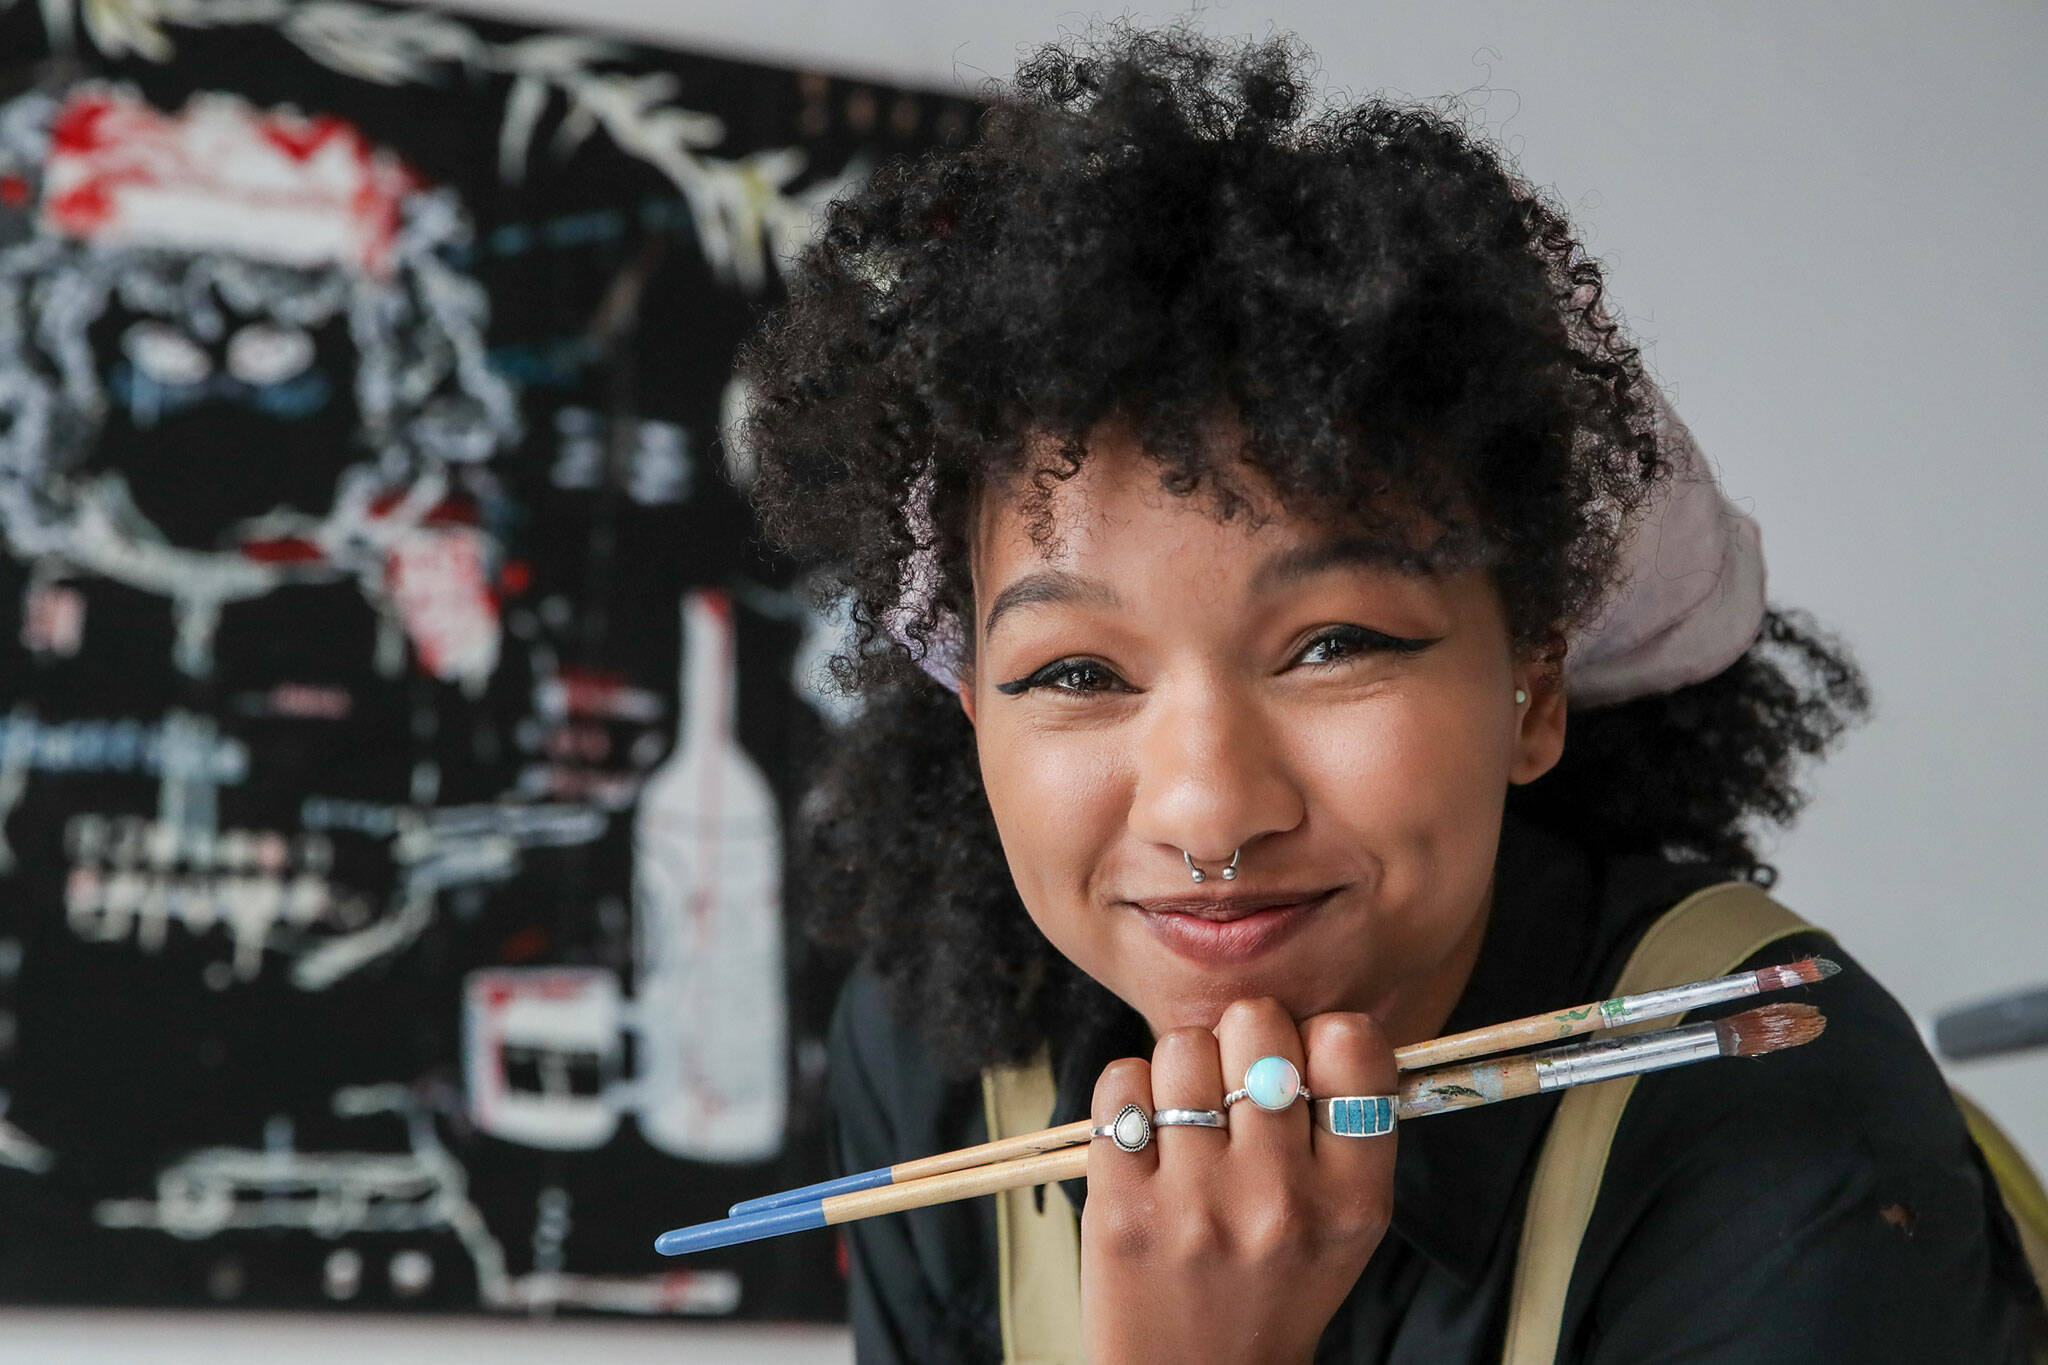 Photos by Kevin Clark / The Herald
Mahllie Beck, 24, specializes in mixed-media, murals, printmaking and upcycled, or recycled, art.
Mahllie Beck is a mixed media artist specializing in acrylic painting and interior murals. (Kevin Clark / The Herald)